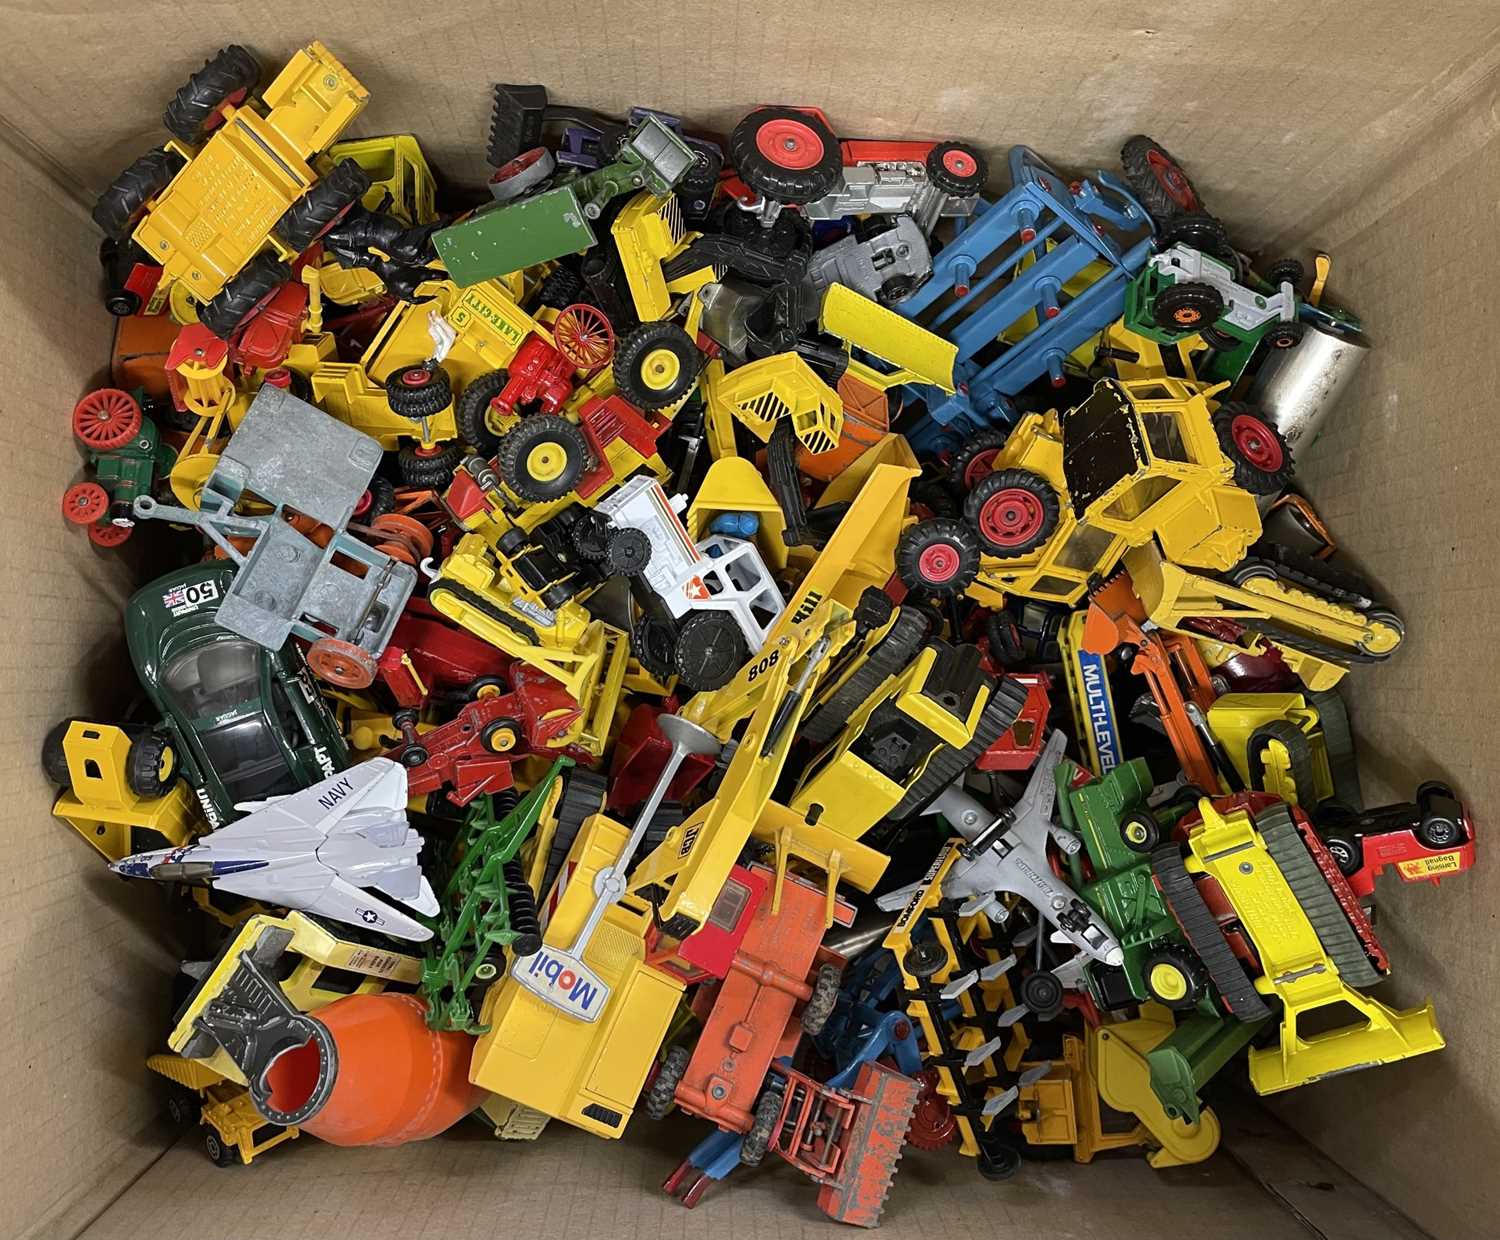 A large collection of various die-cast vehicles, mostly farming / construction.